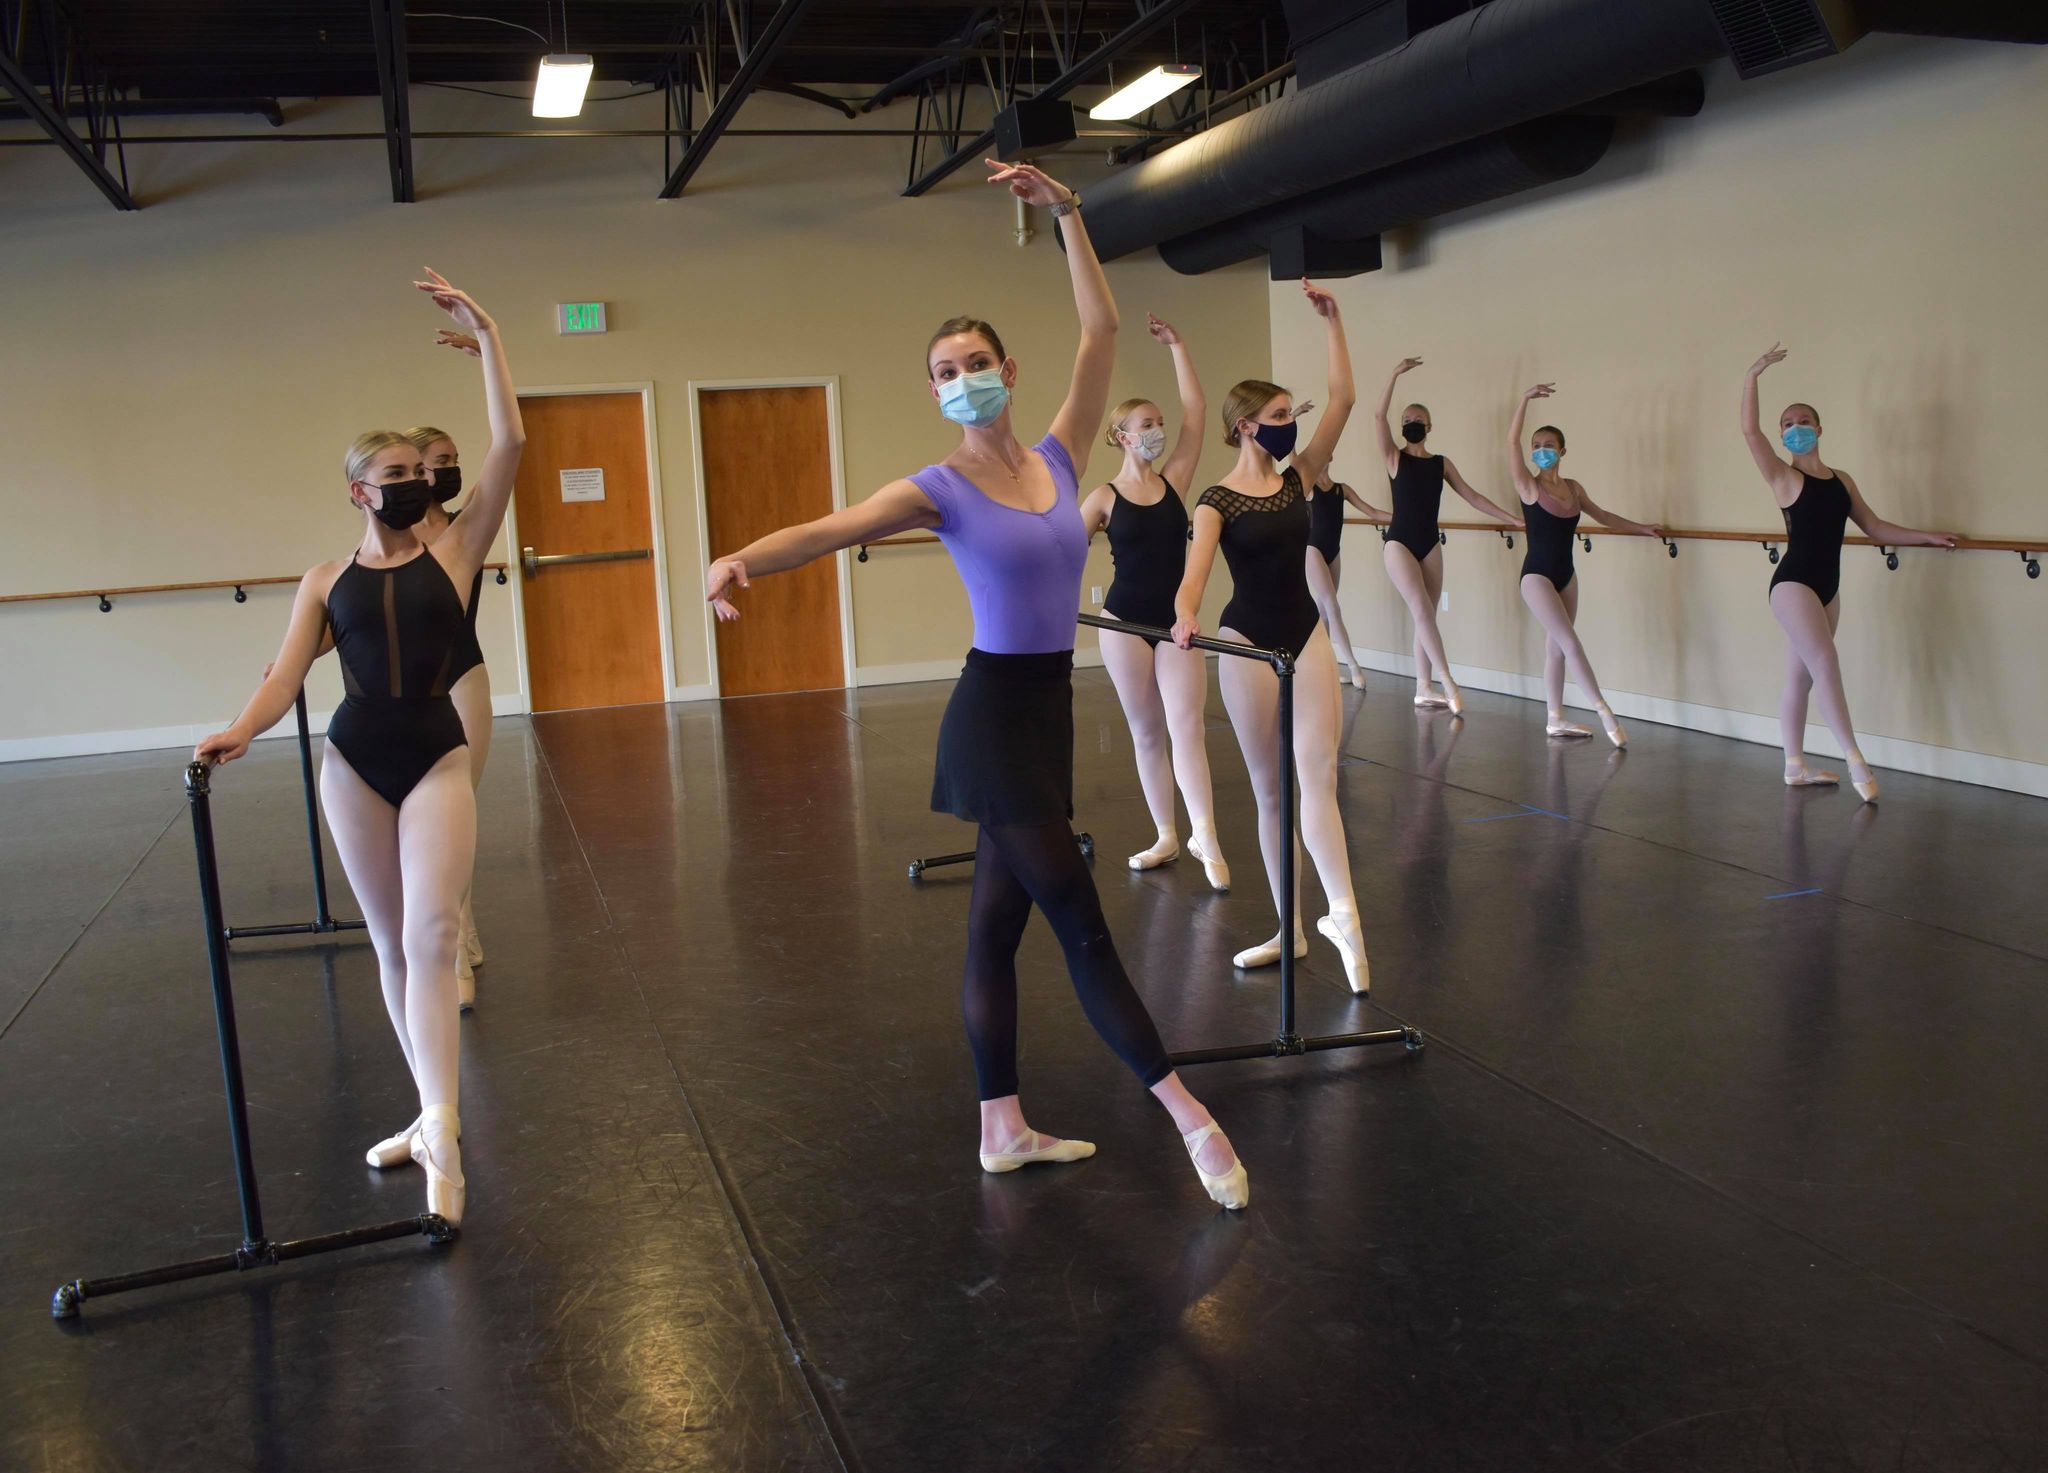 Danielle Dreis, dressed in a lavender leotard and black ballet skirt and tights with mask on, leads class in the front of a studio, positioned in Croisé devant. Other students in black leotards and pink tights and black masks copy her behind.